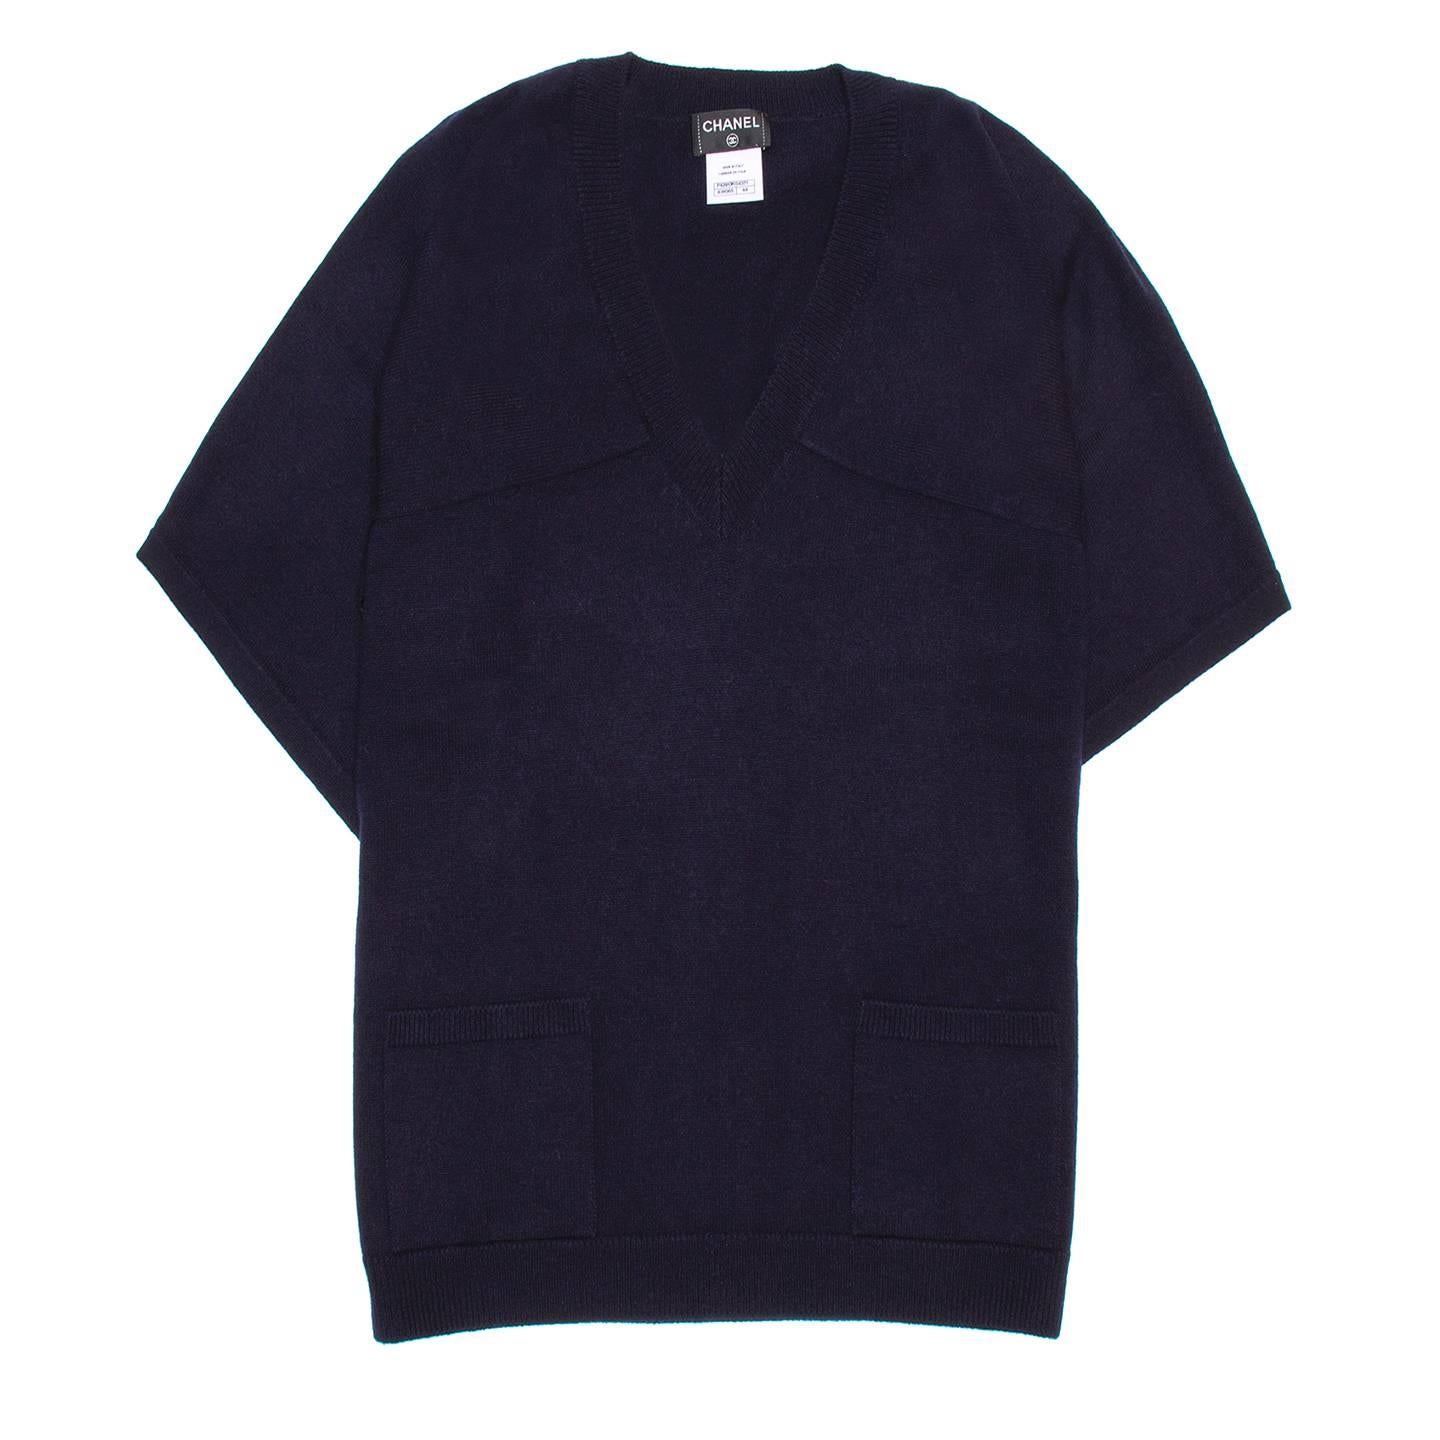 Mediterranean blue cashmere V-neck pullover with short kimono sleeves open at under arm seam. The fit is loose and two little patch pockets enrich the front with CC Logo Placket.

Size  44 French sizing

Condition  Pristine